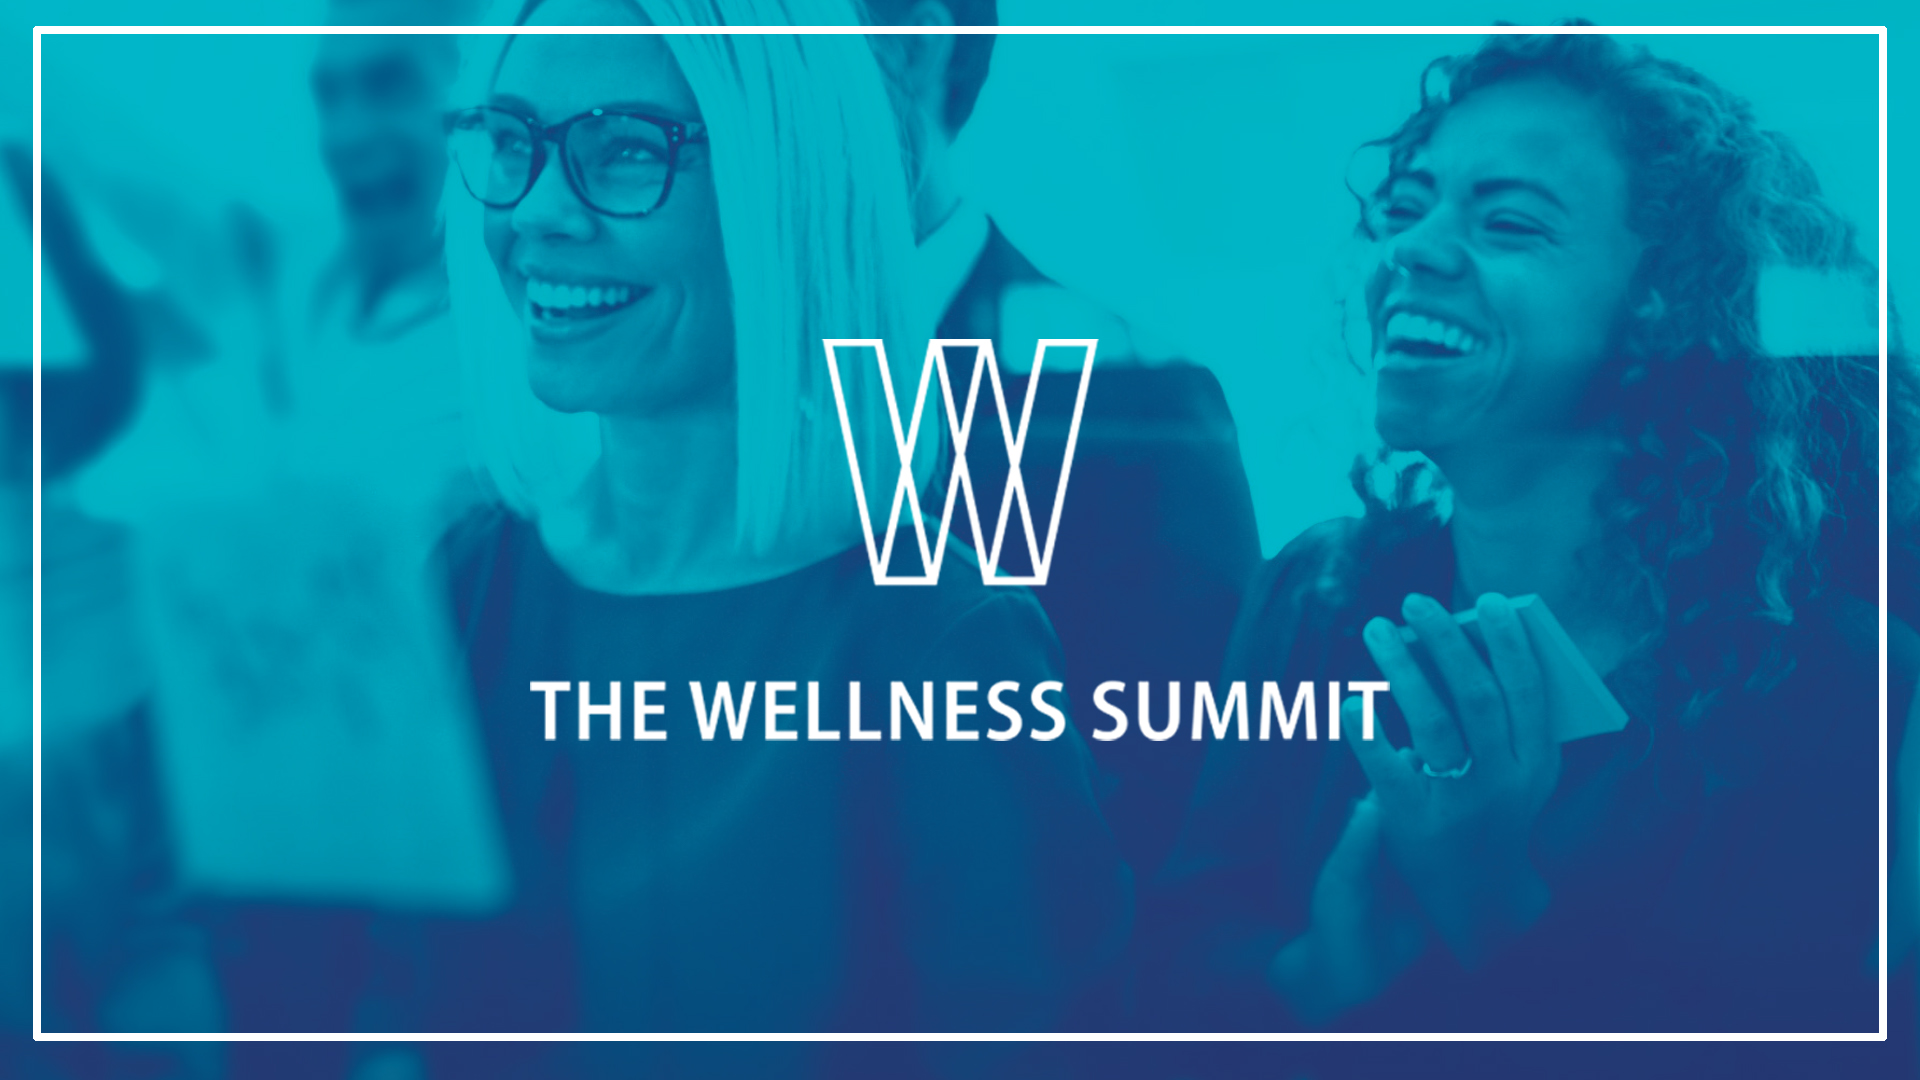 A blue duotone image of two women sticky post-its to a window. Over the image there is the headline: The Wellness Summit.